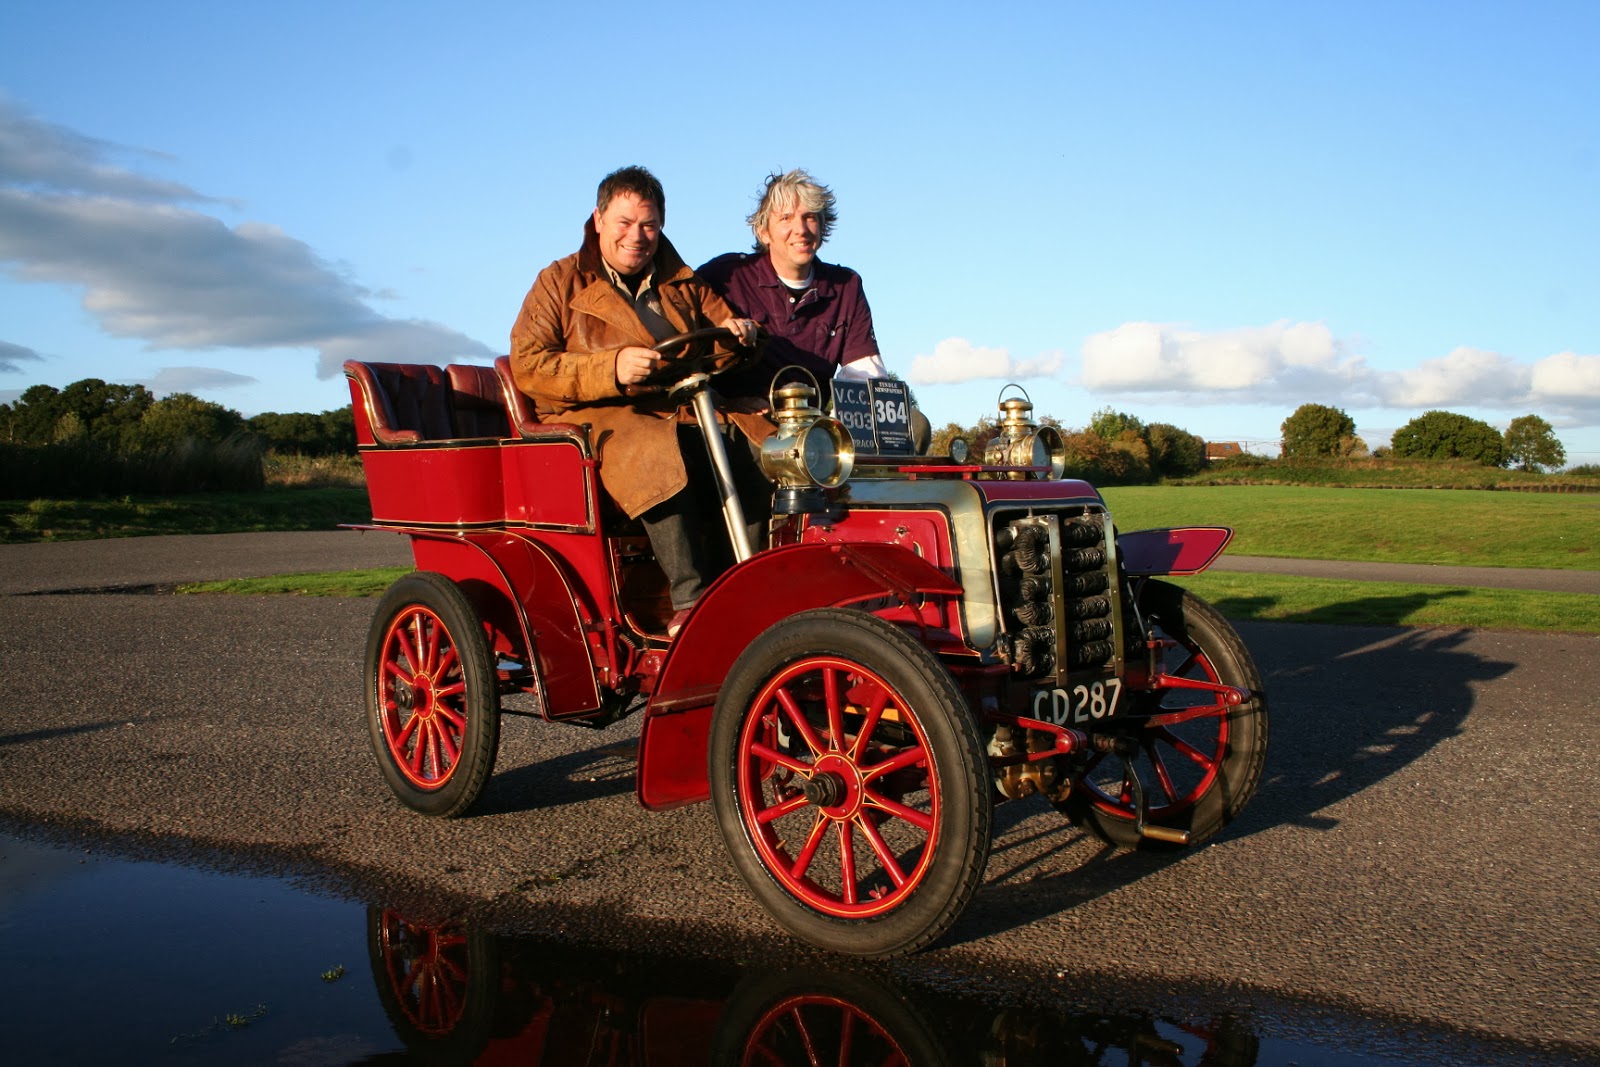 Mike Brewer and Edd China in a 1903 Darracq